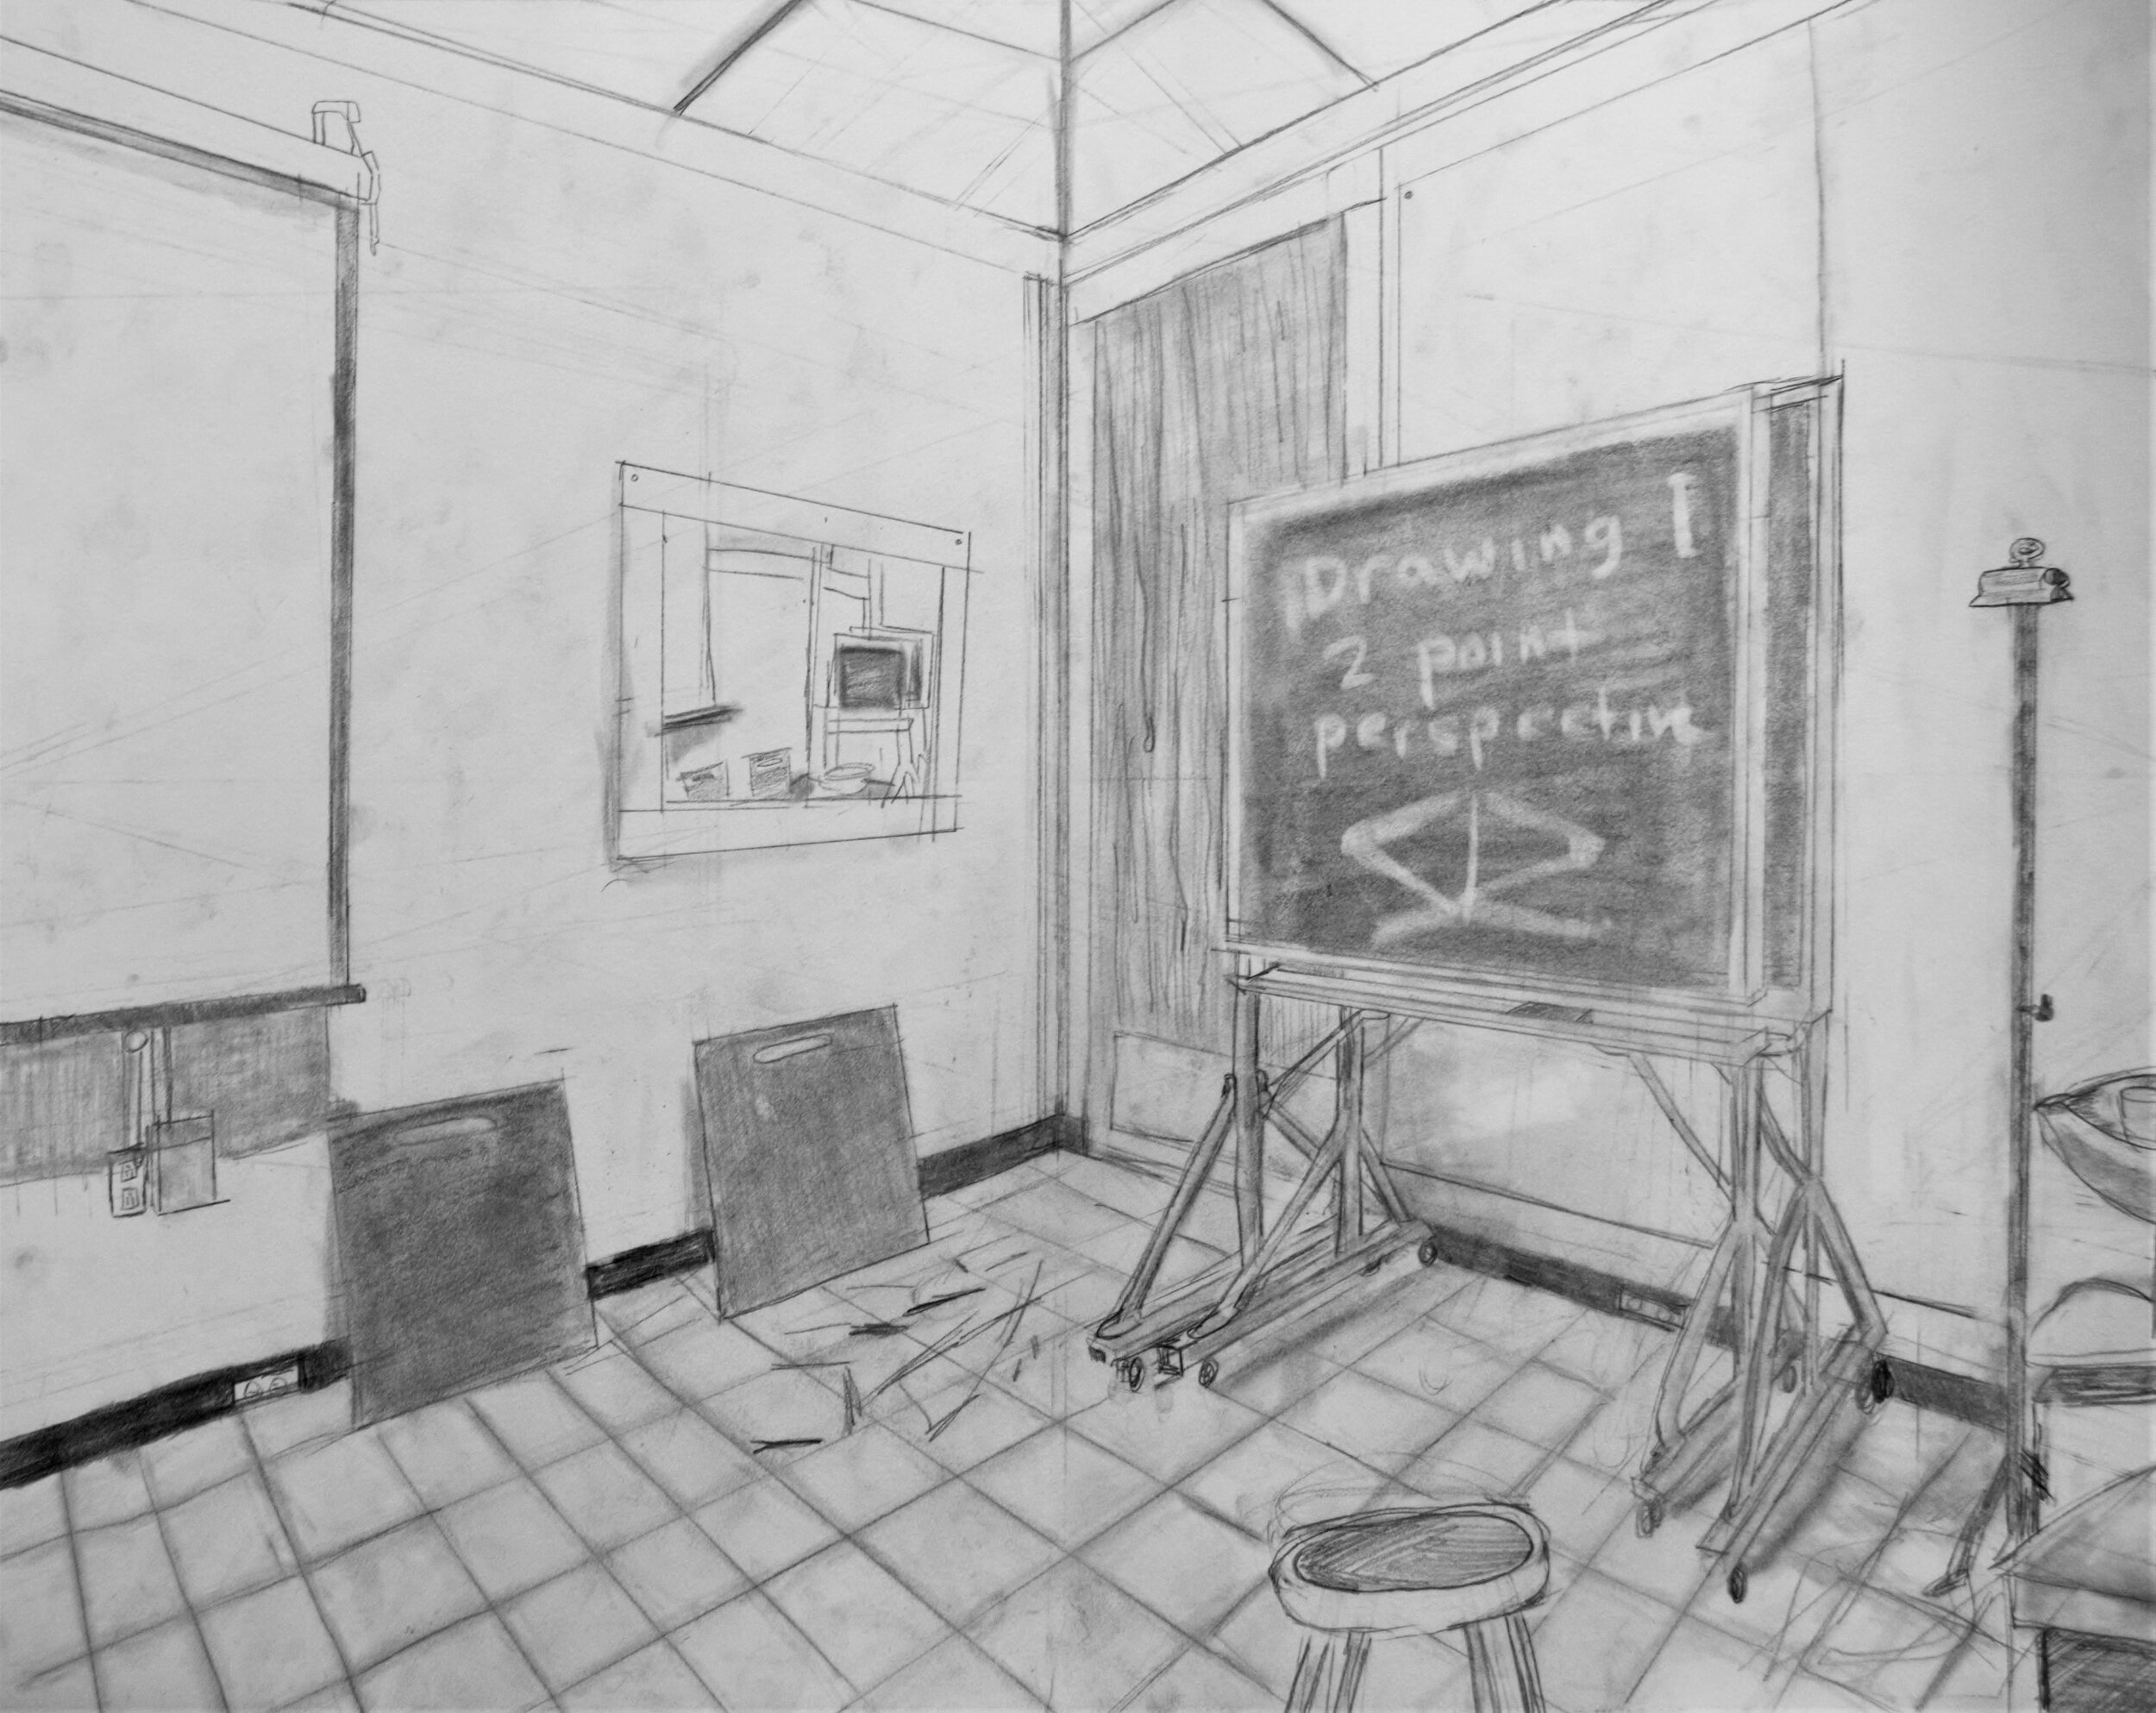  Students use two point perspective to develop a drawing from observation in a space, graphite on paper, 18x24 inches, Drawing I, 2019 